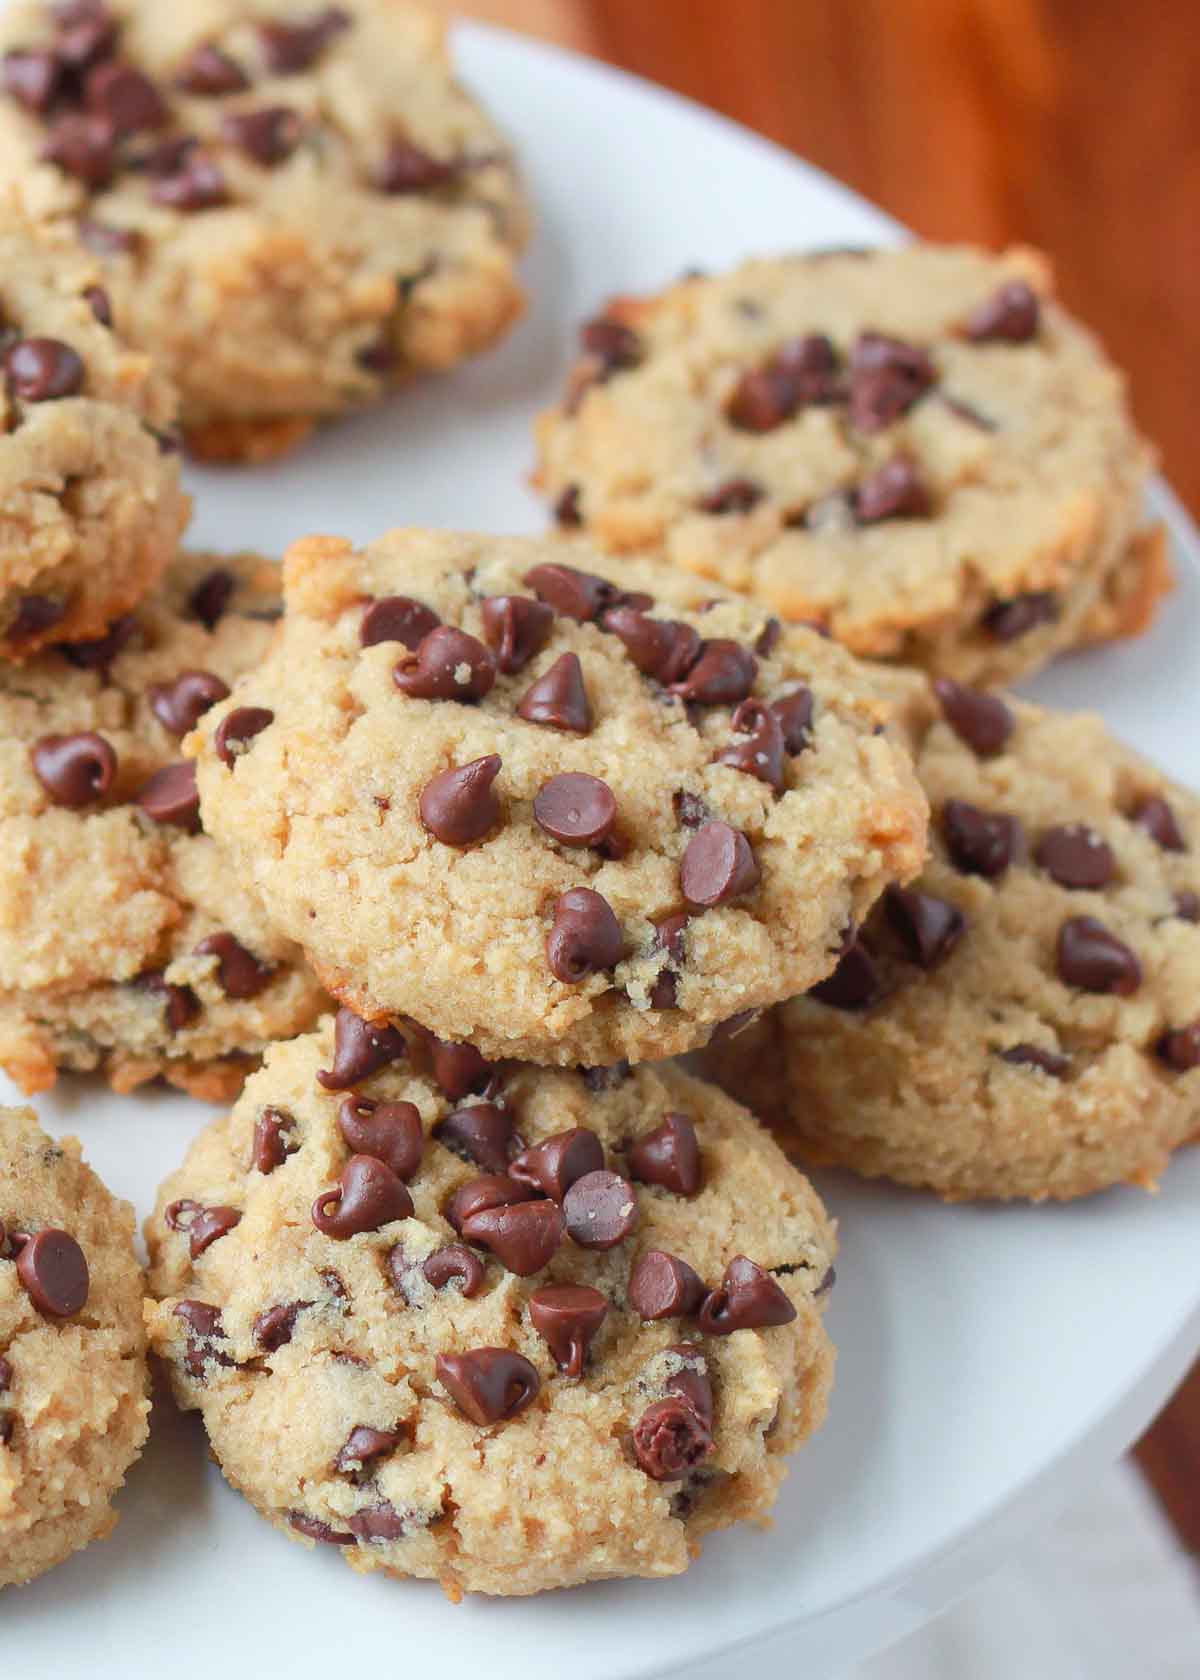 Soft-Baked Almond Flour Chocolate Chip Cookies - Bendy, melt-in-your-mouth gems ❤️ Easy recipe for gluten-free, dairy-free, low-carb chocolate chip cookies. 